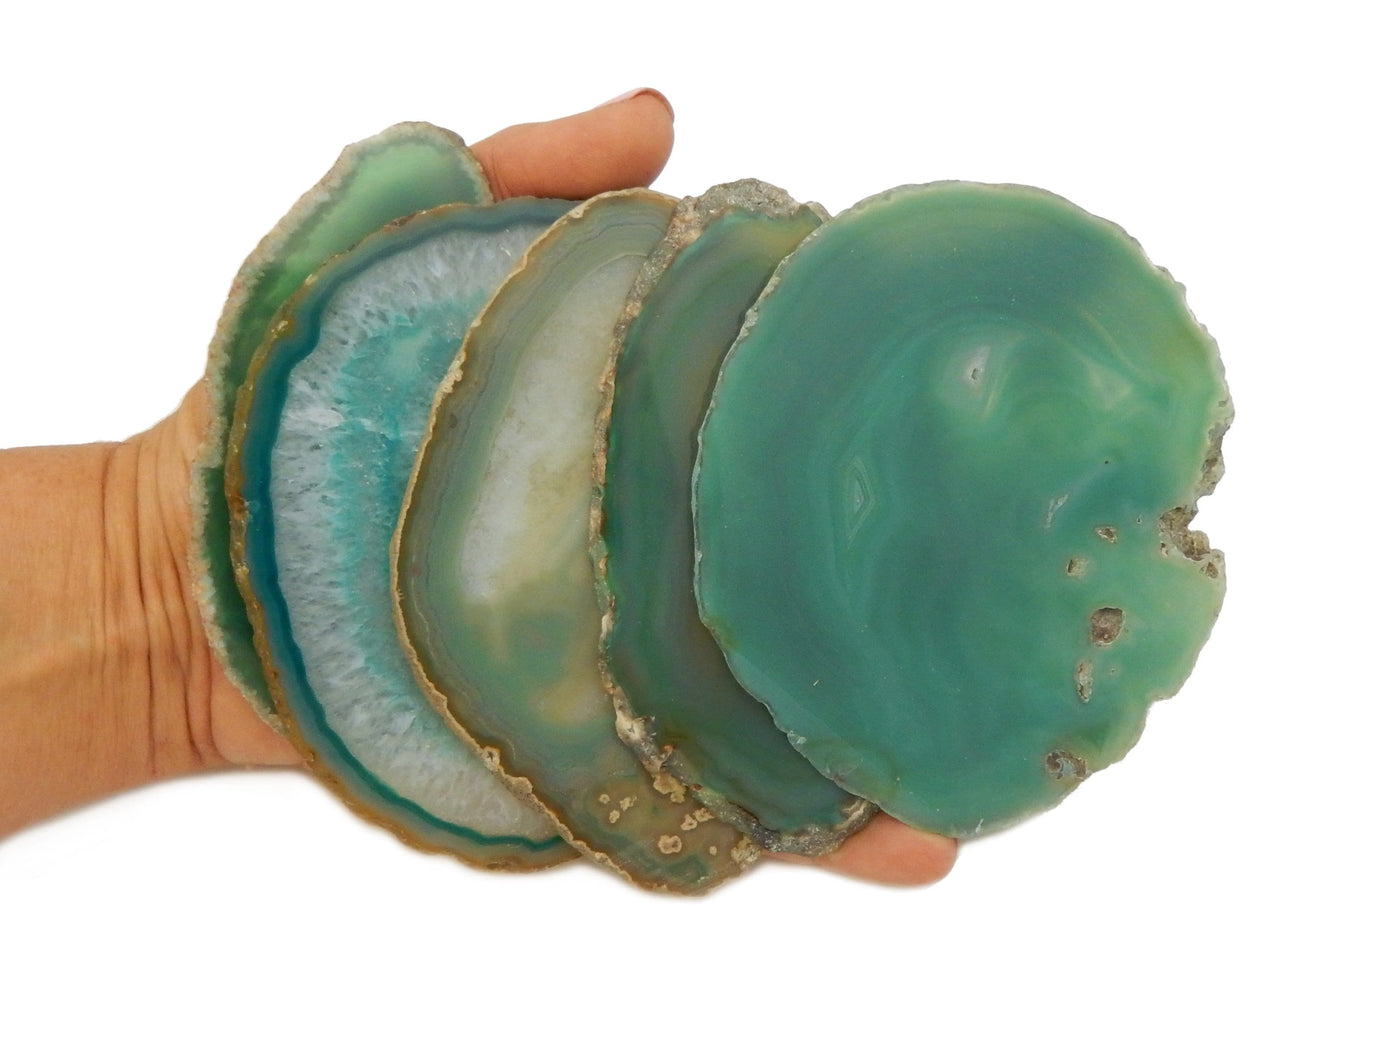 green agate slices in hand for size reference 